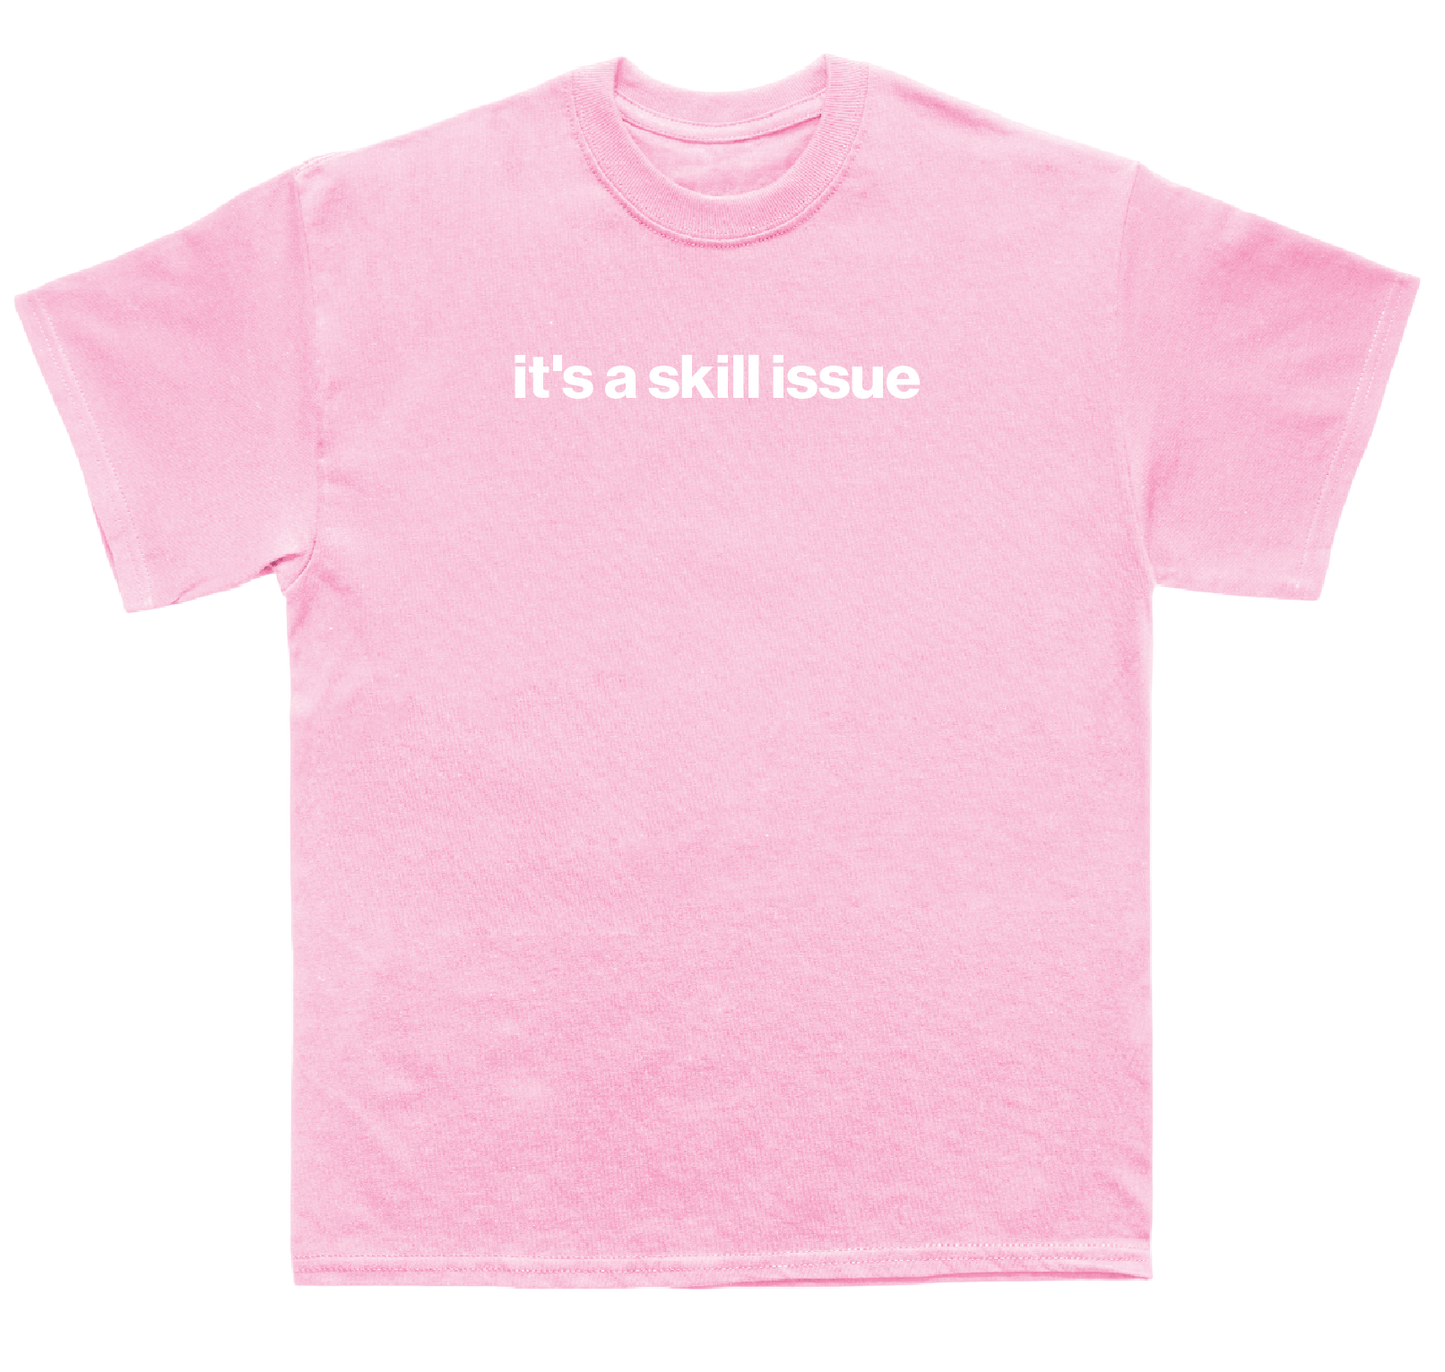 it's a skill issue shirt